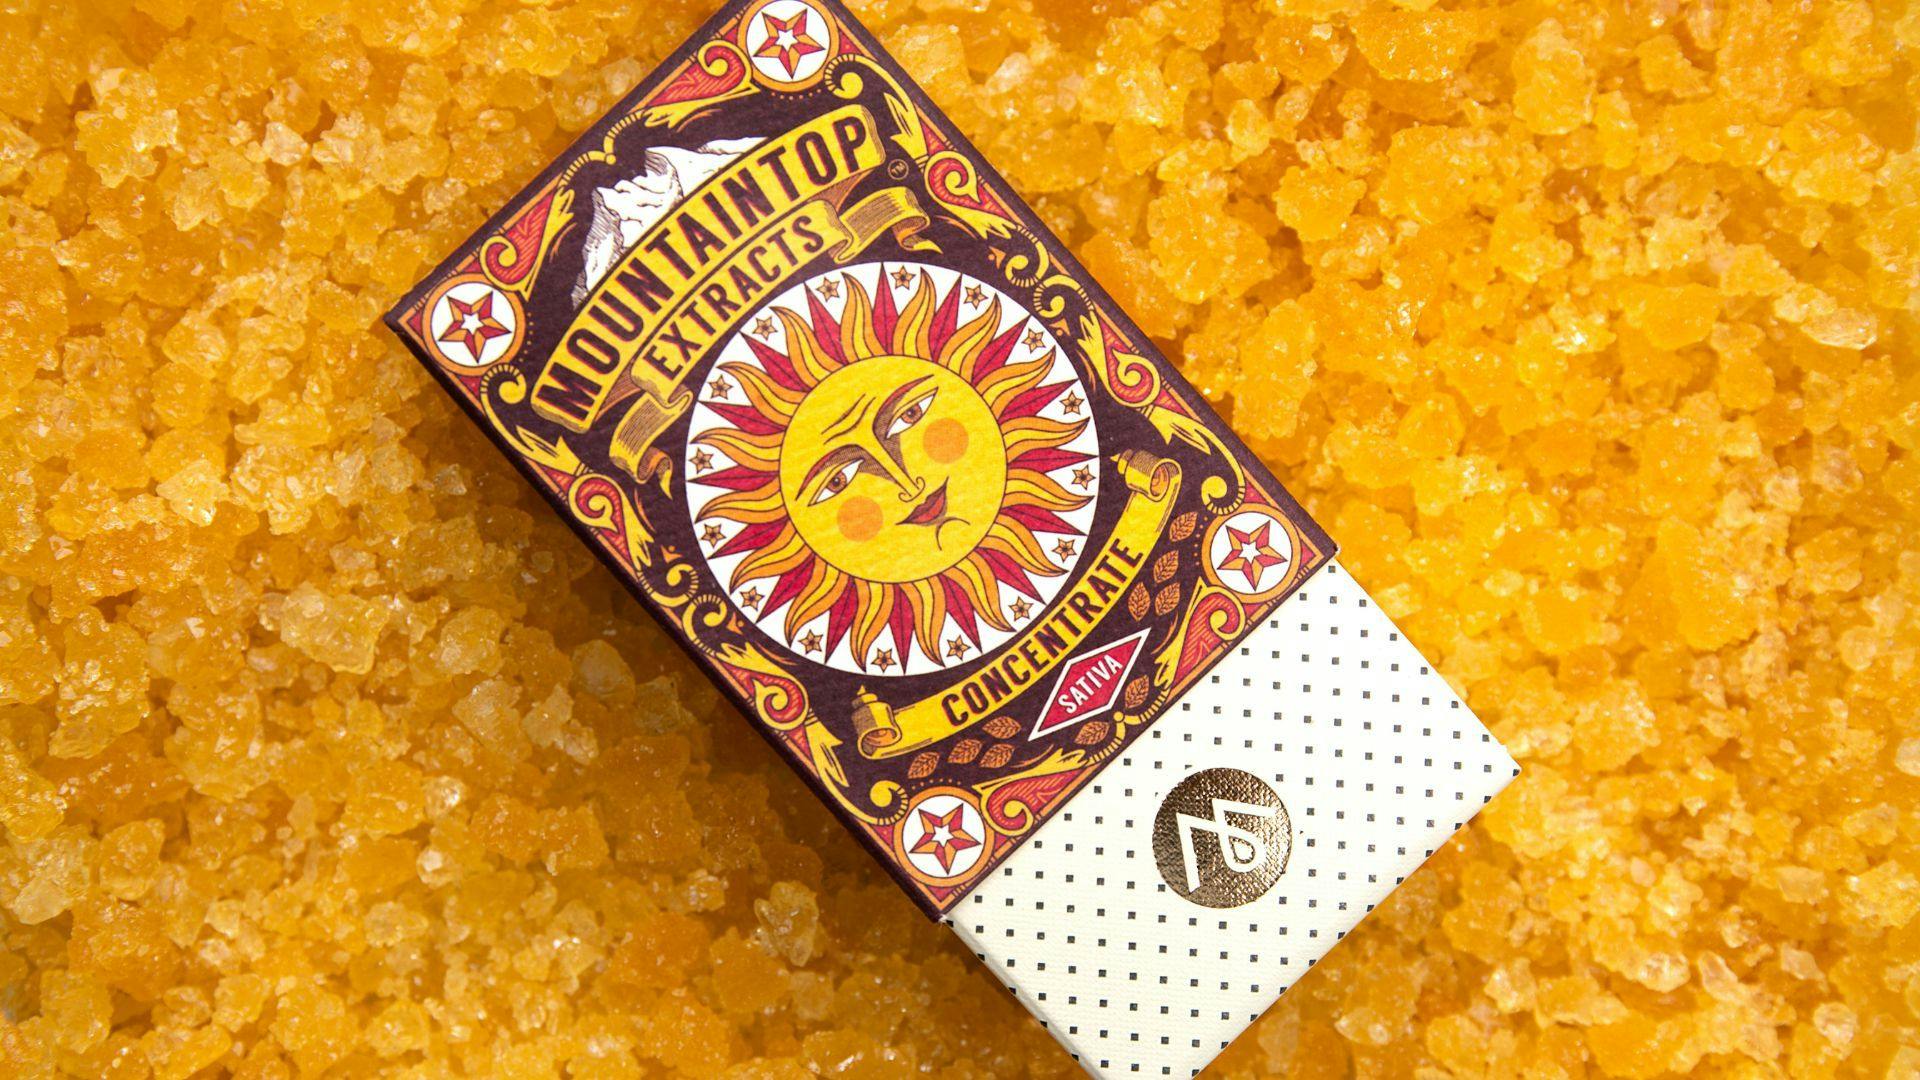 a photo of Mountaintop Extracts cannabis concentrate packaging, resting atop concentrated cannabis caviar.